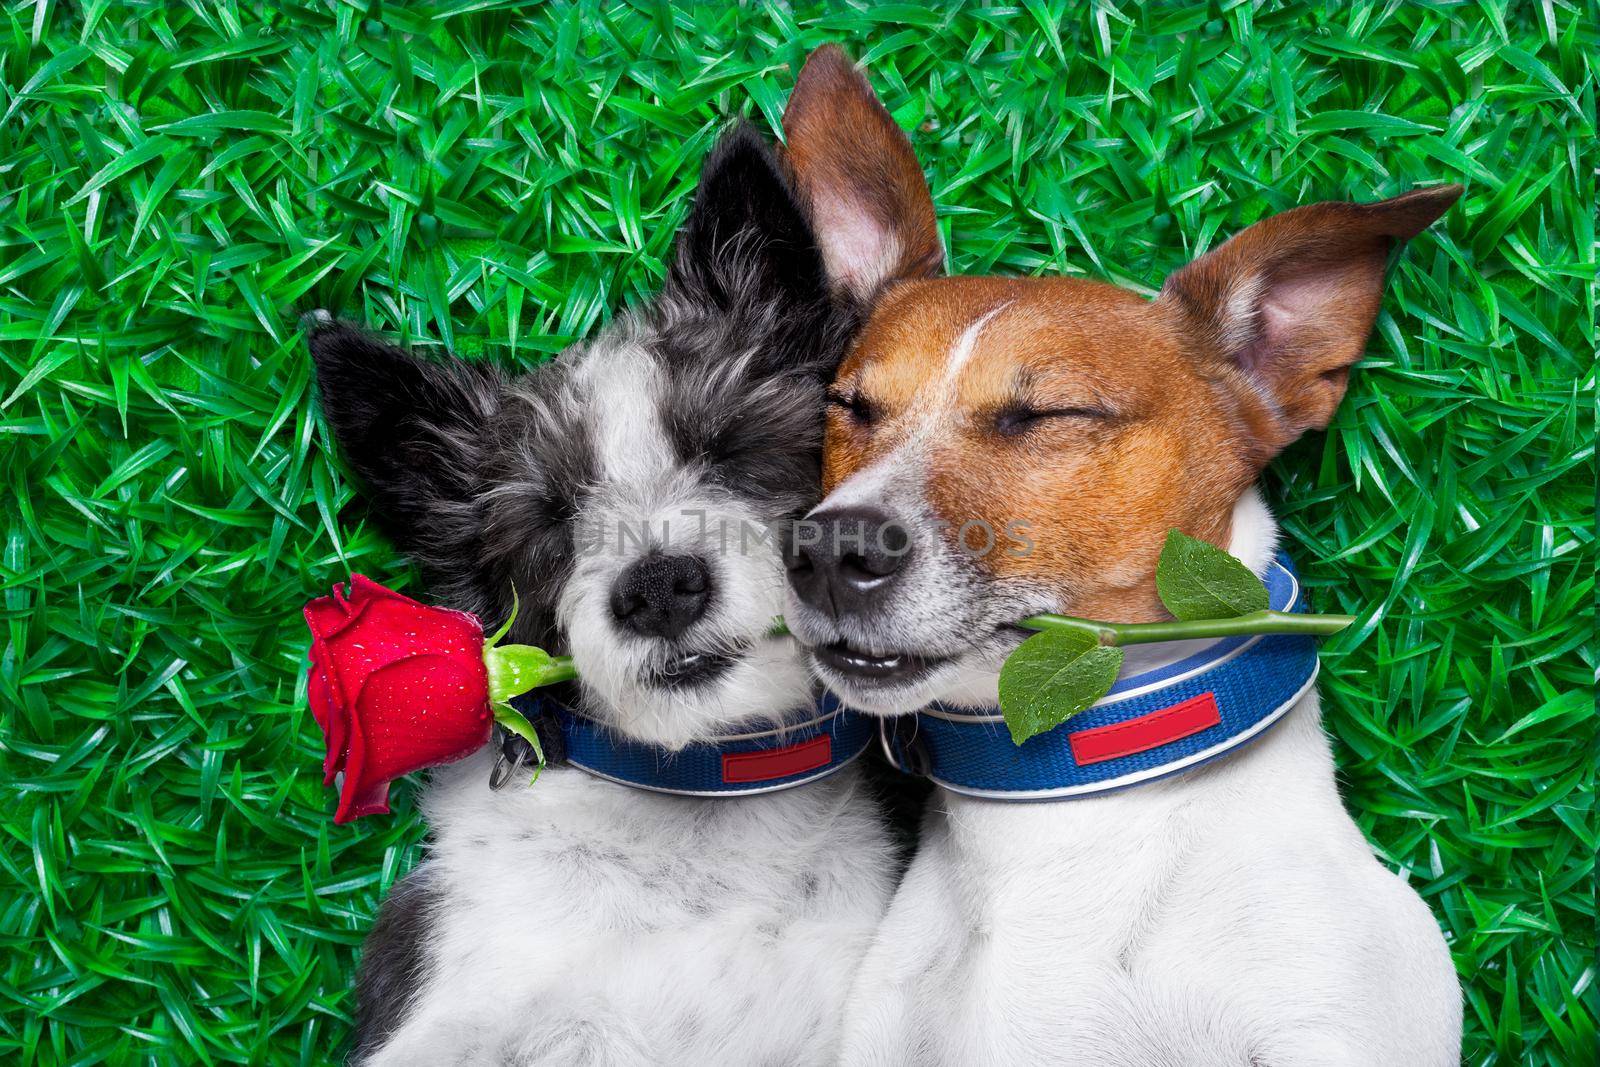 cuple of dogs on love fro valentines day or wedding aniversary very close together cudly and cozy  with rose in mouth